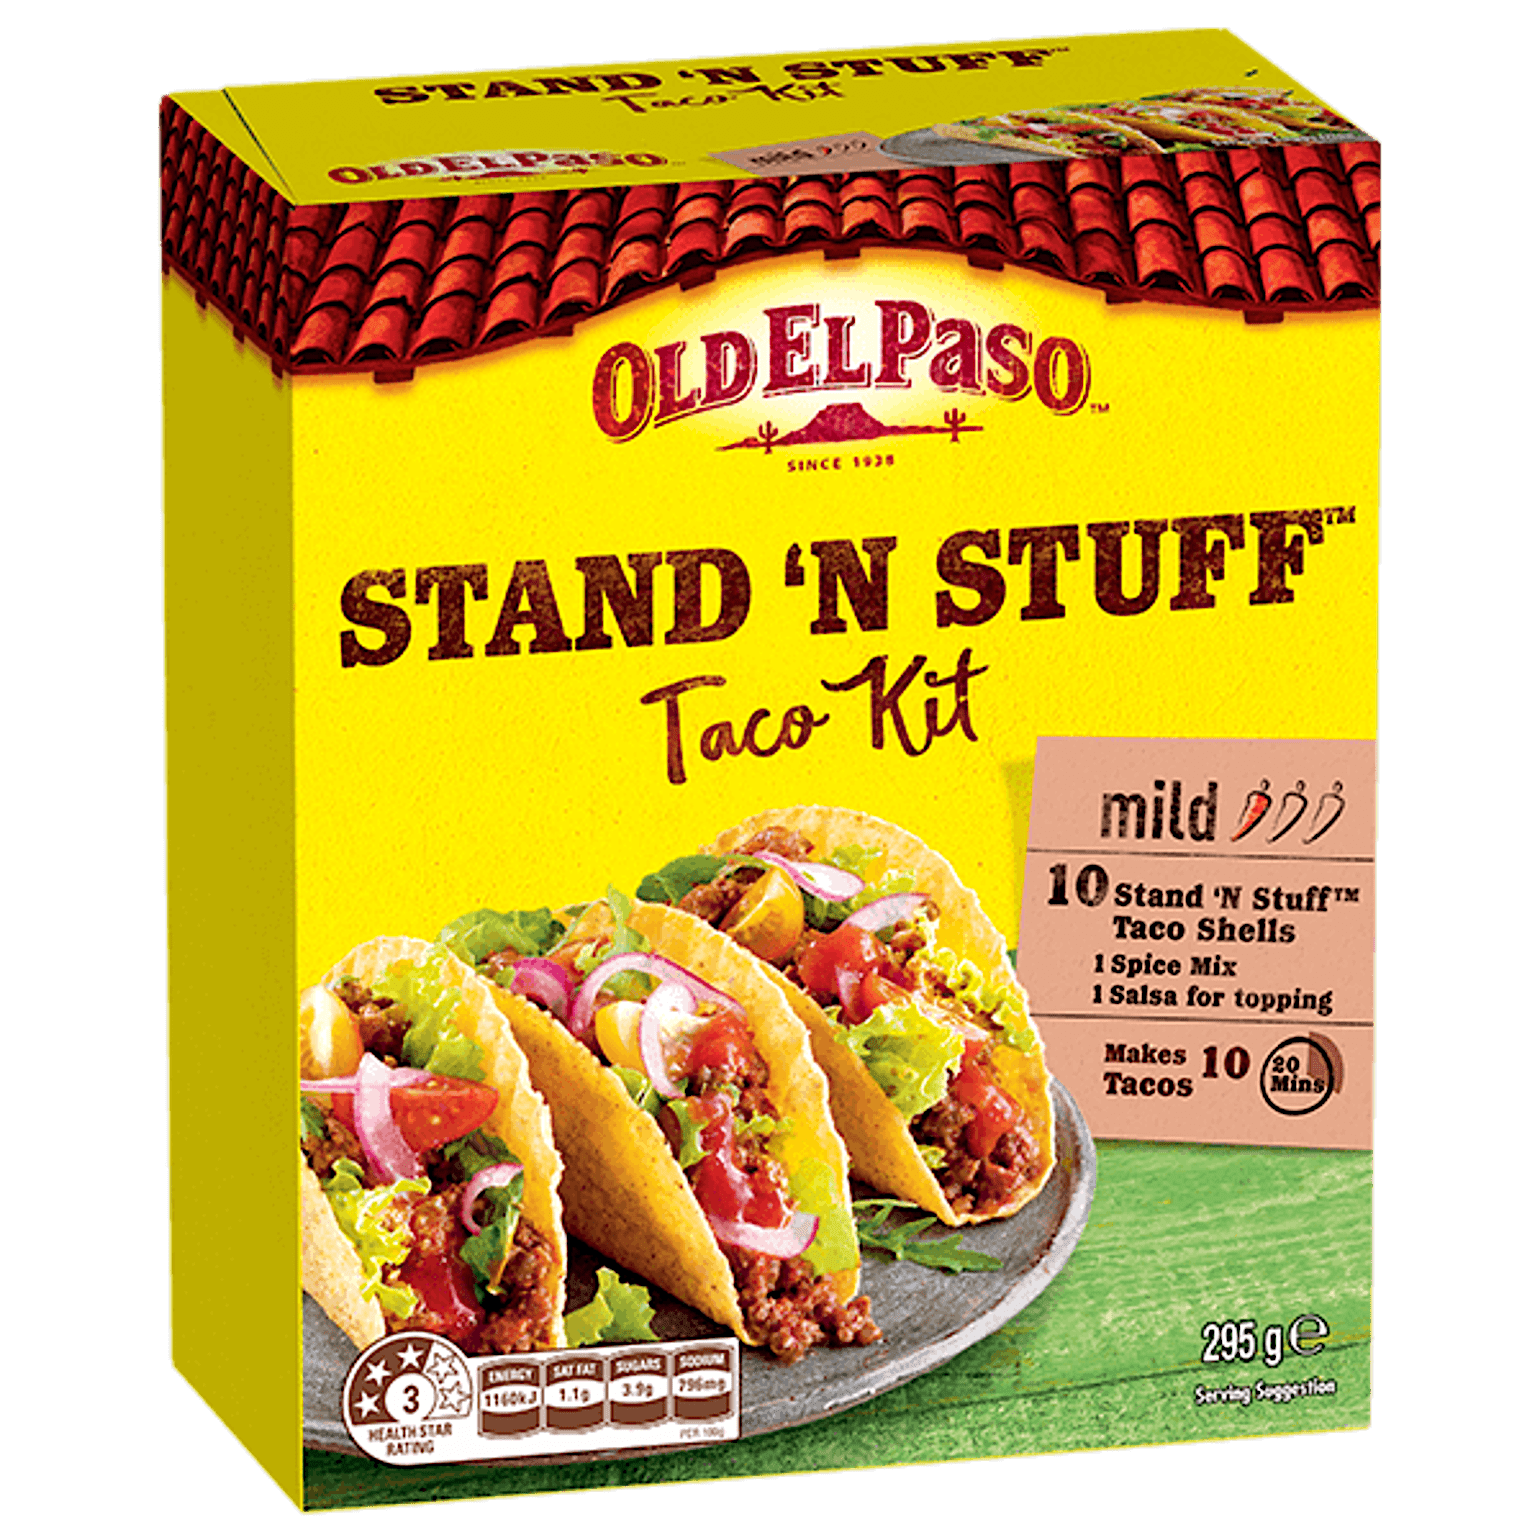 a pack of Old El Paso's stand n stuff taco kit mild containing mini taco shells, spice mix & salsa for topping (295g)